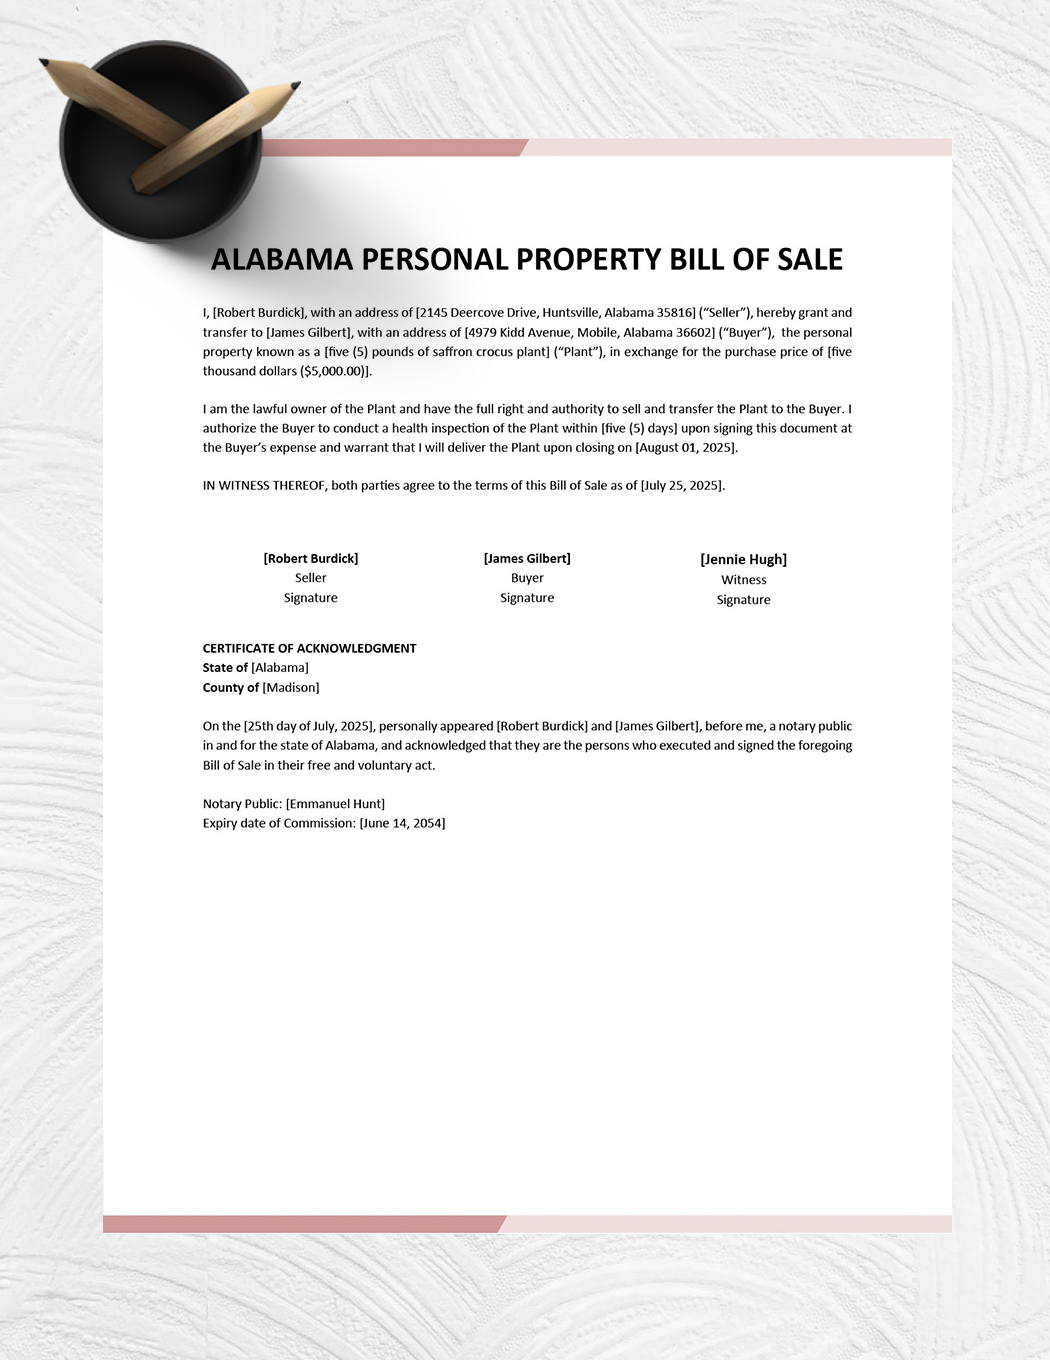 Alabama Personal Property Bill of Sale Template